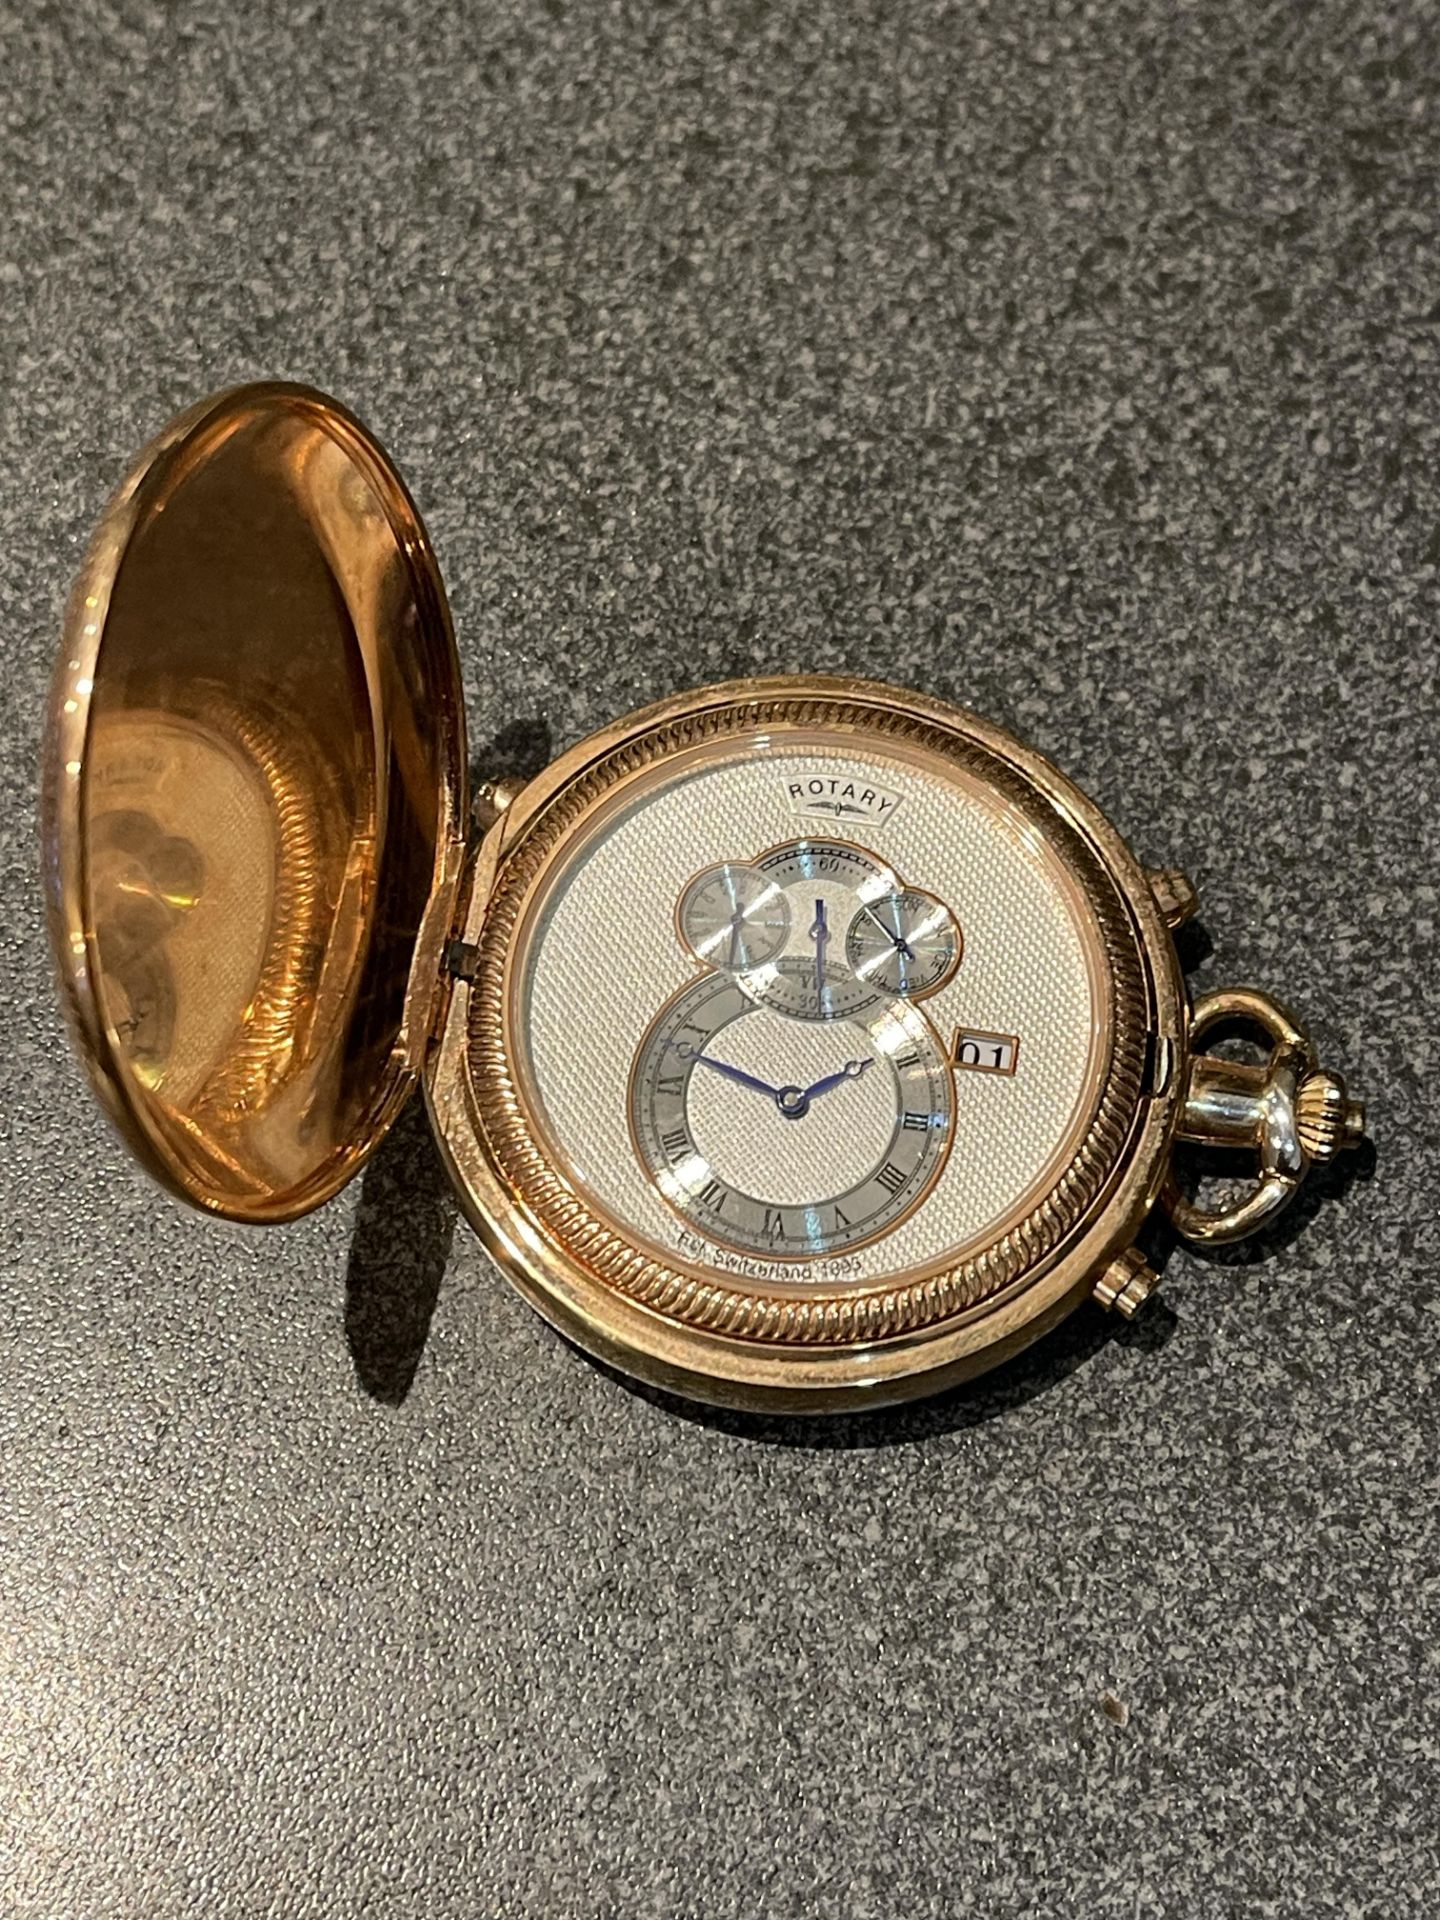 Rotary pocket watch automatic working - Image 2 of 5